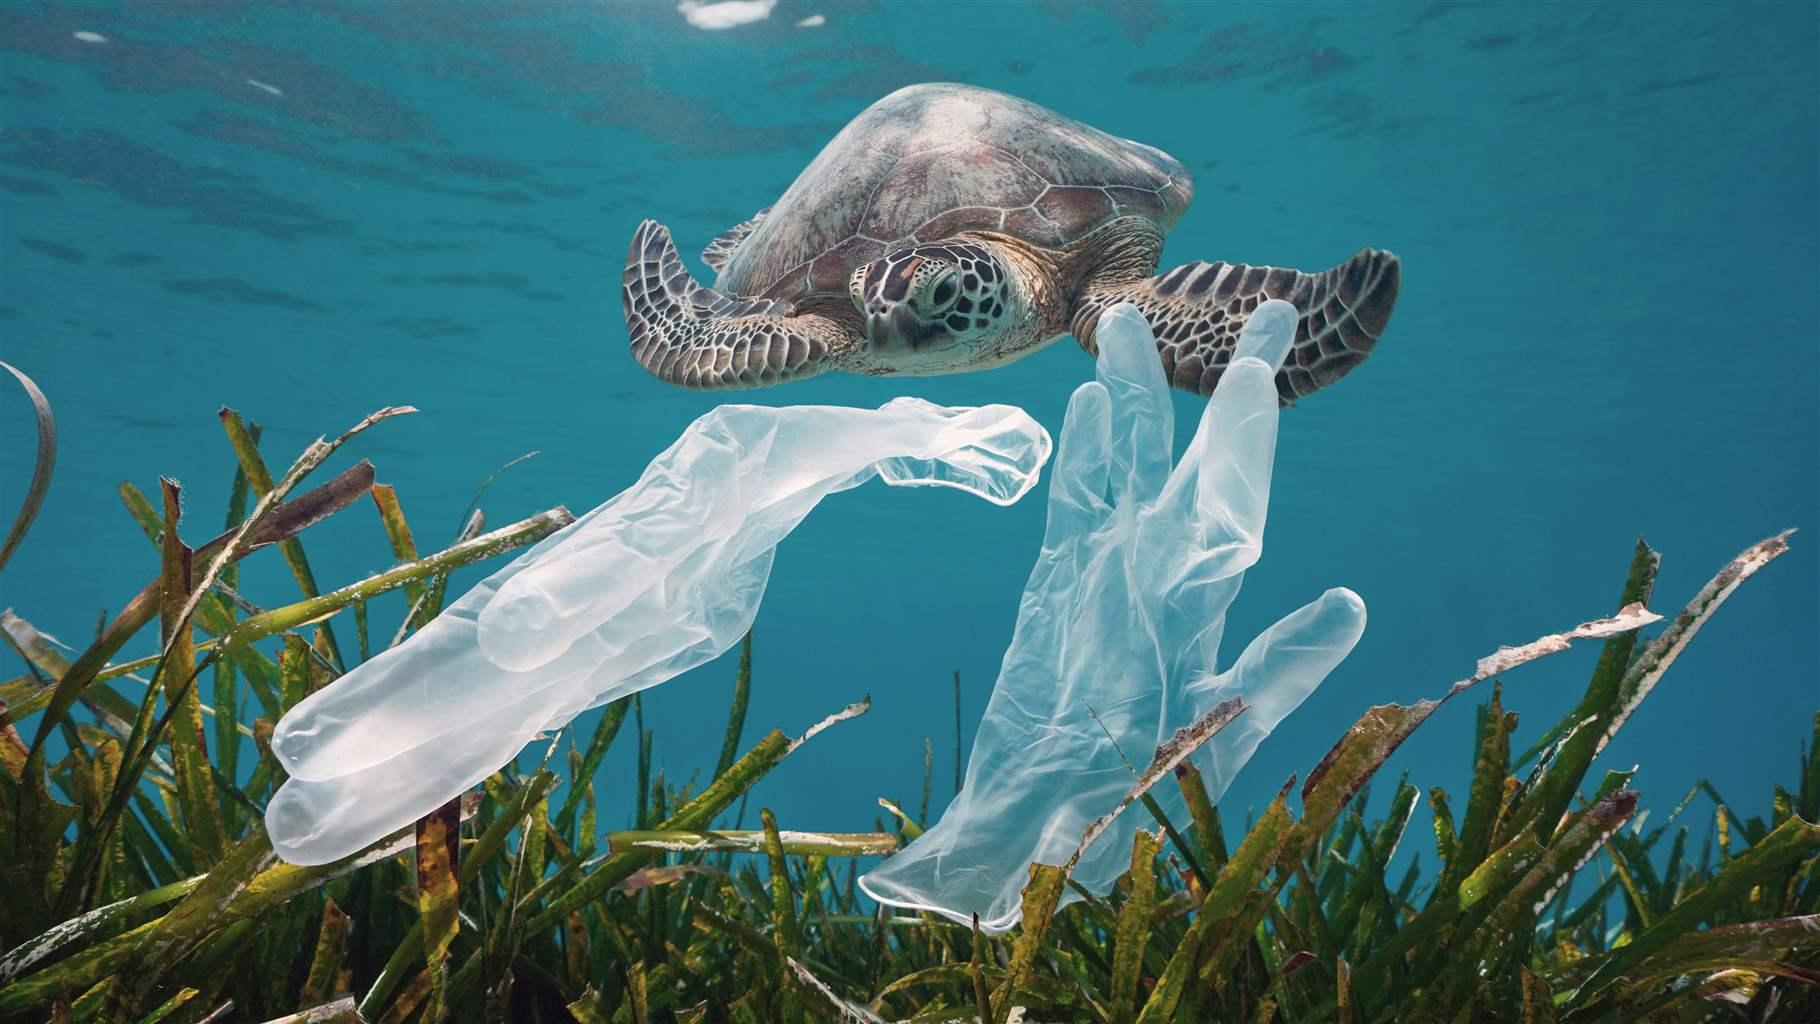 Plastic waste pollution in the ocean, disposable gloves with seagrass and a sea turtle underwater